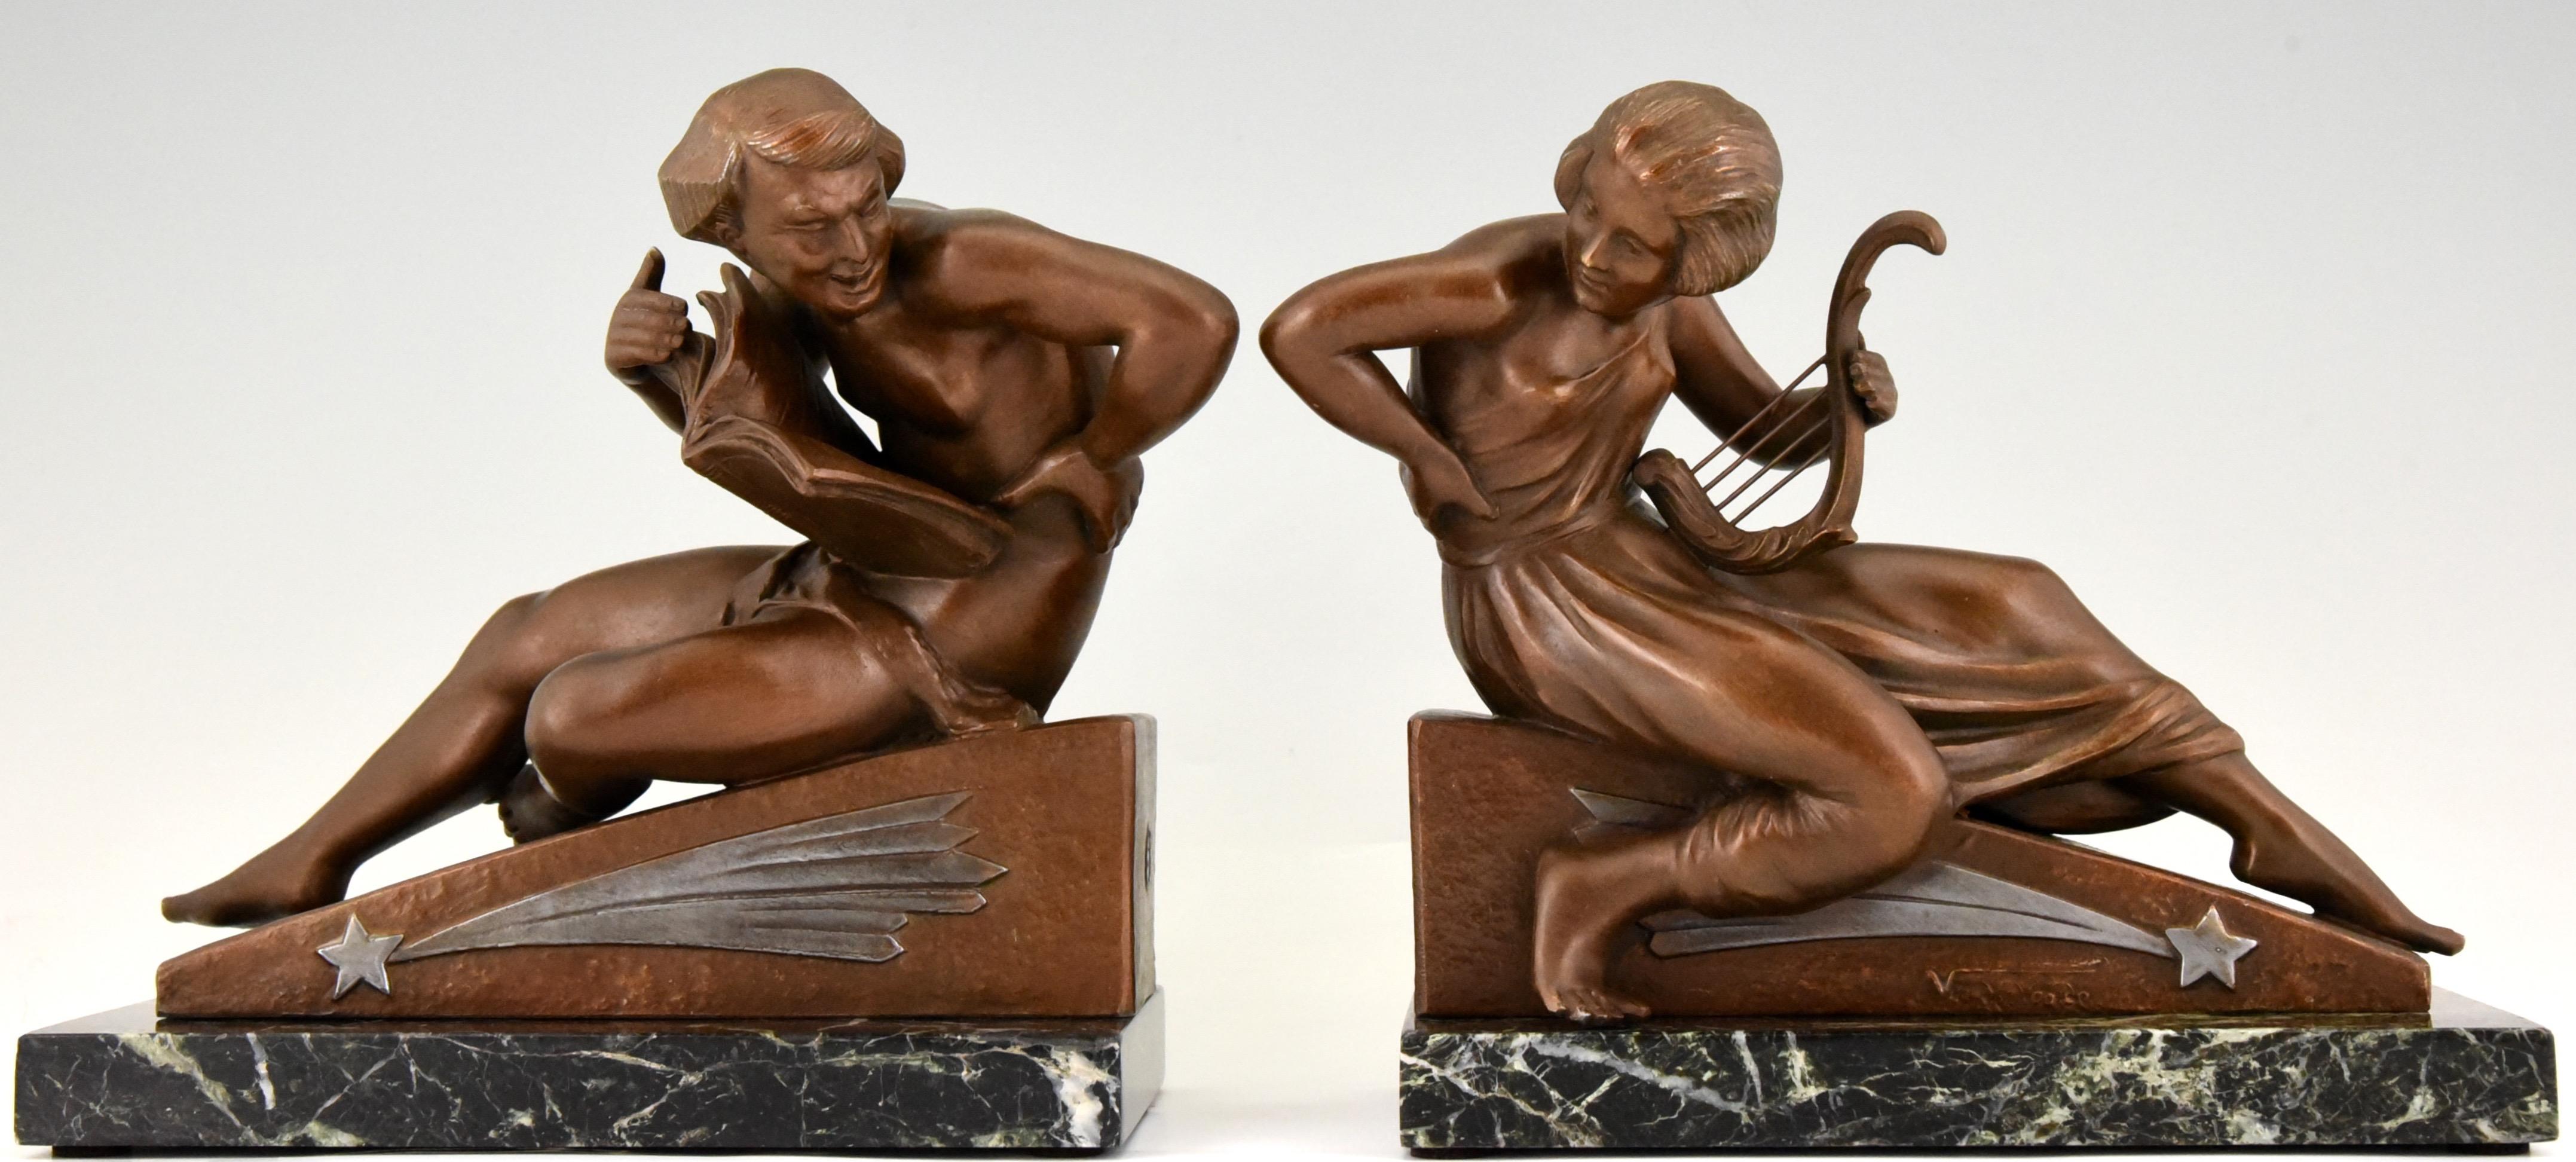 Very tall pair of Art Deco bookends, allegory of music.
Man with music book and woman with lyre by the artist Georges Van de Voorde. Cast at the Brig foundry in Paris. The Art metal sculptures have a lovely brown and silver patina and are mounted